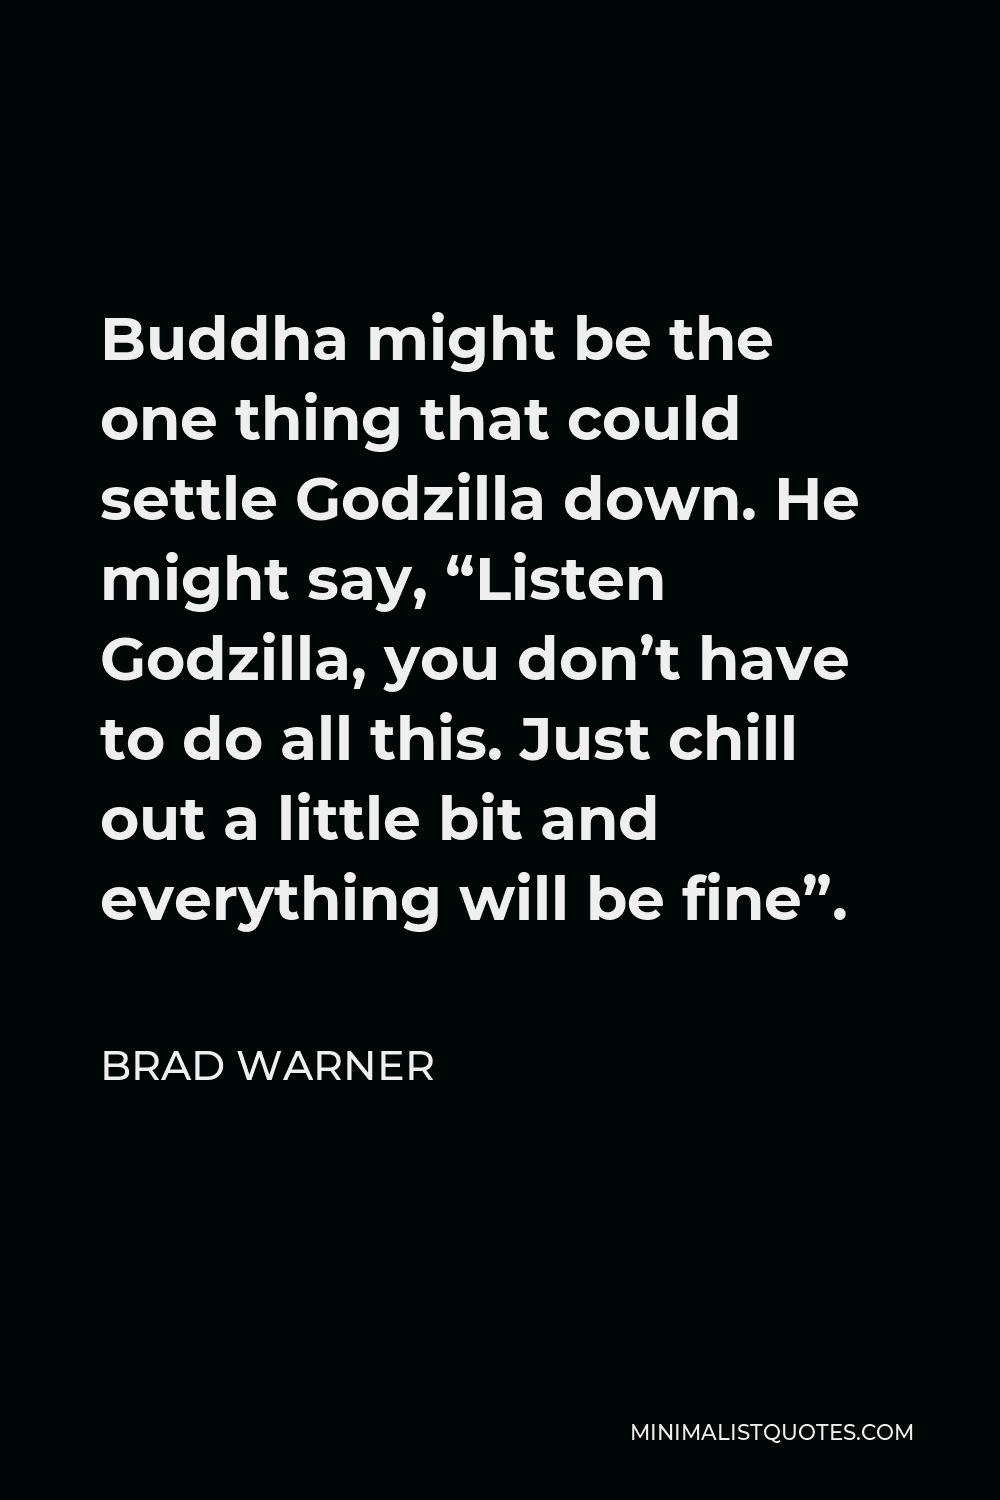 Brad Warner Quote - Buddha might be the one thing that could settle Godzilla down. He might say, “Listen Godzilla, you don’t have to do all this. Just chill out a little bit and everything will be fine”.